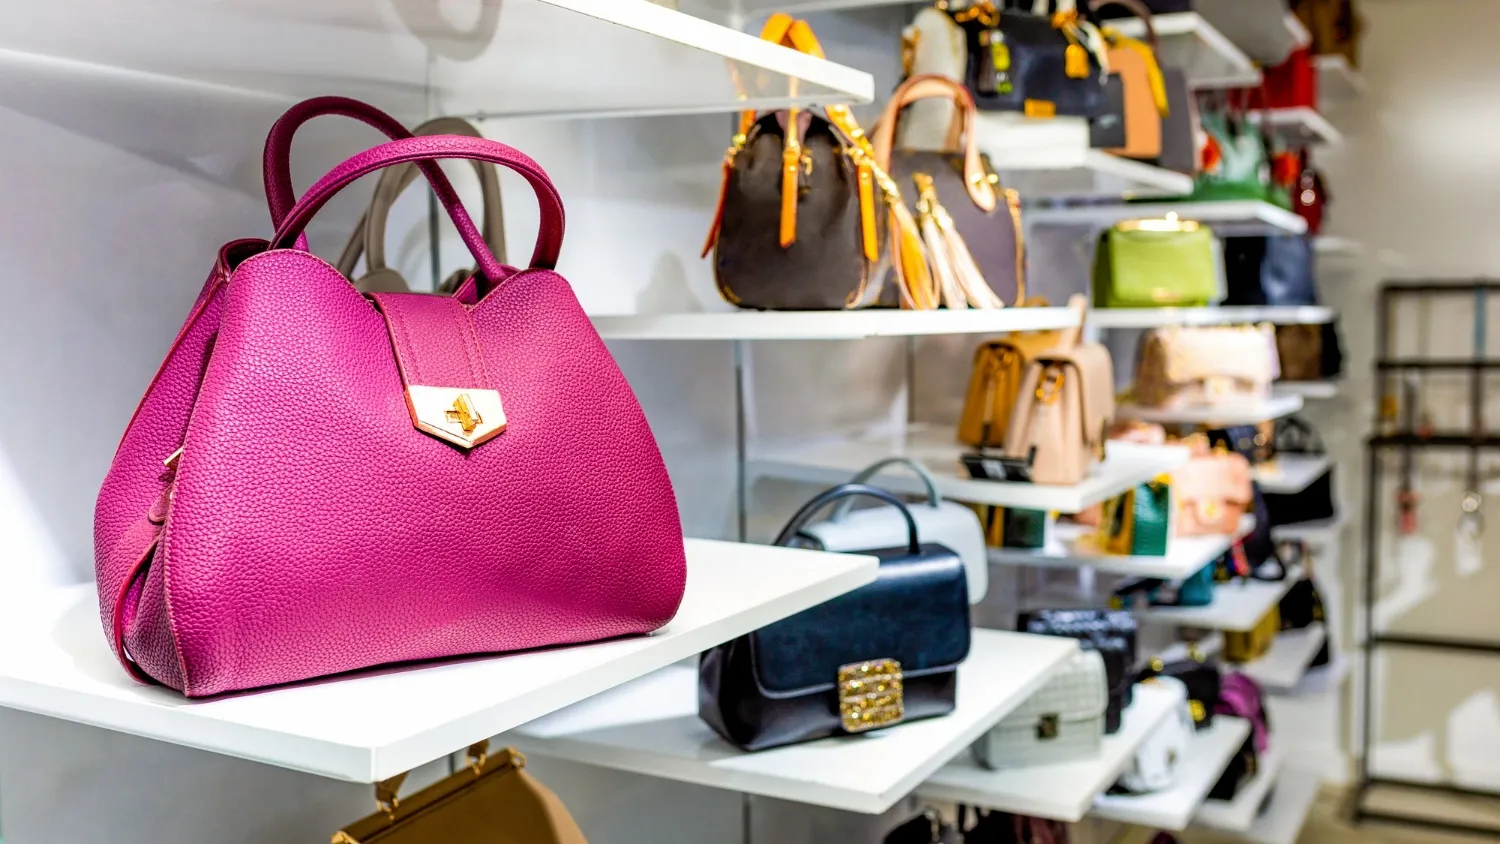 Colorful handbags in a luxury fashion store